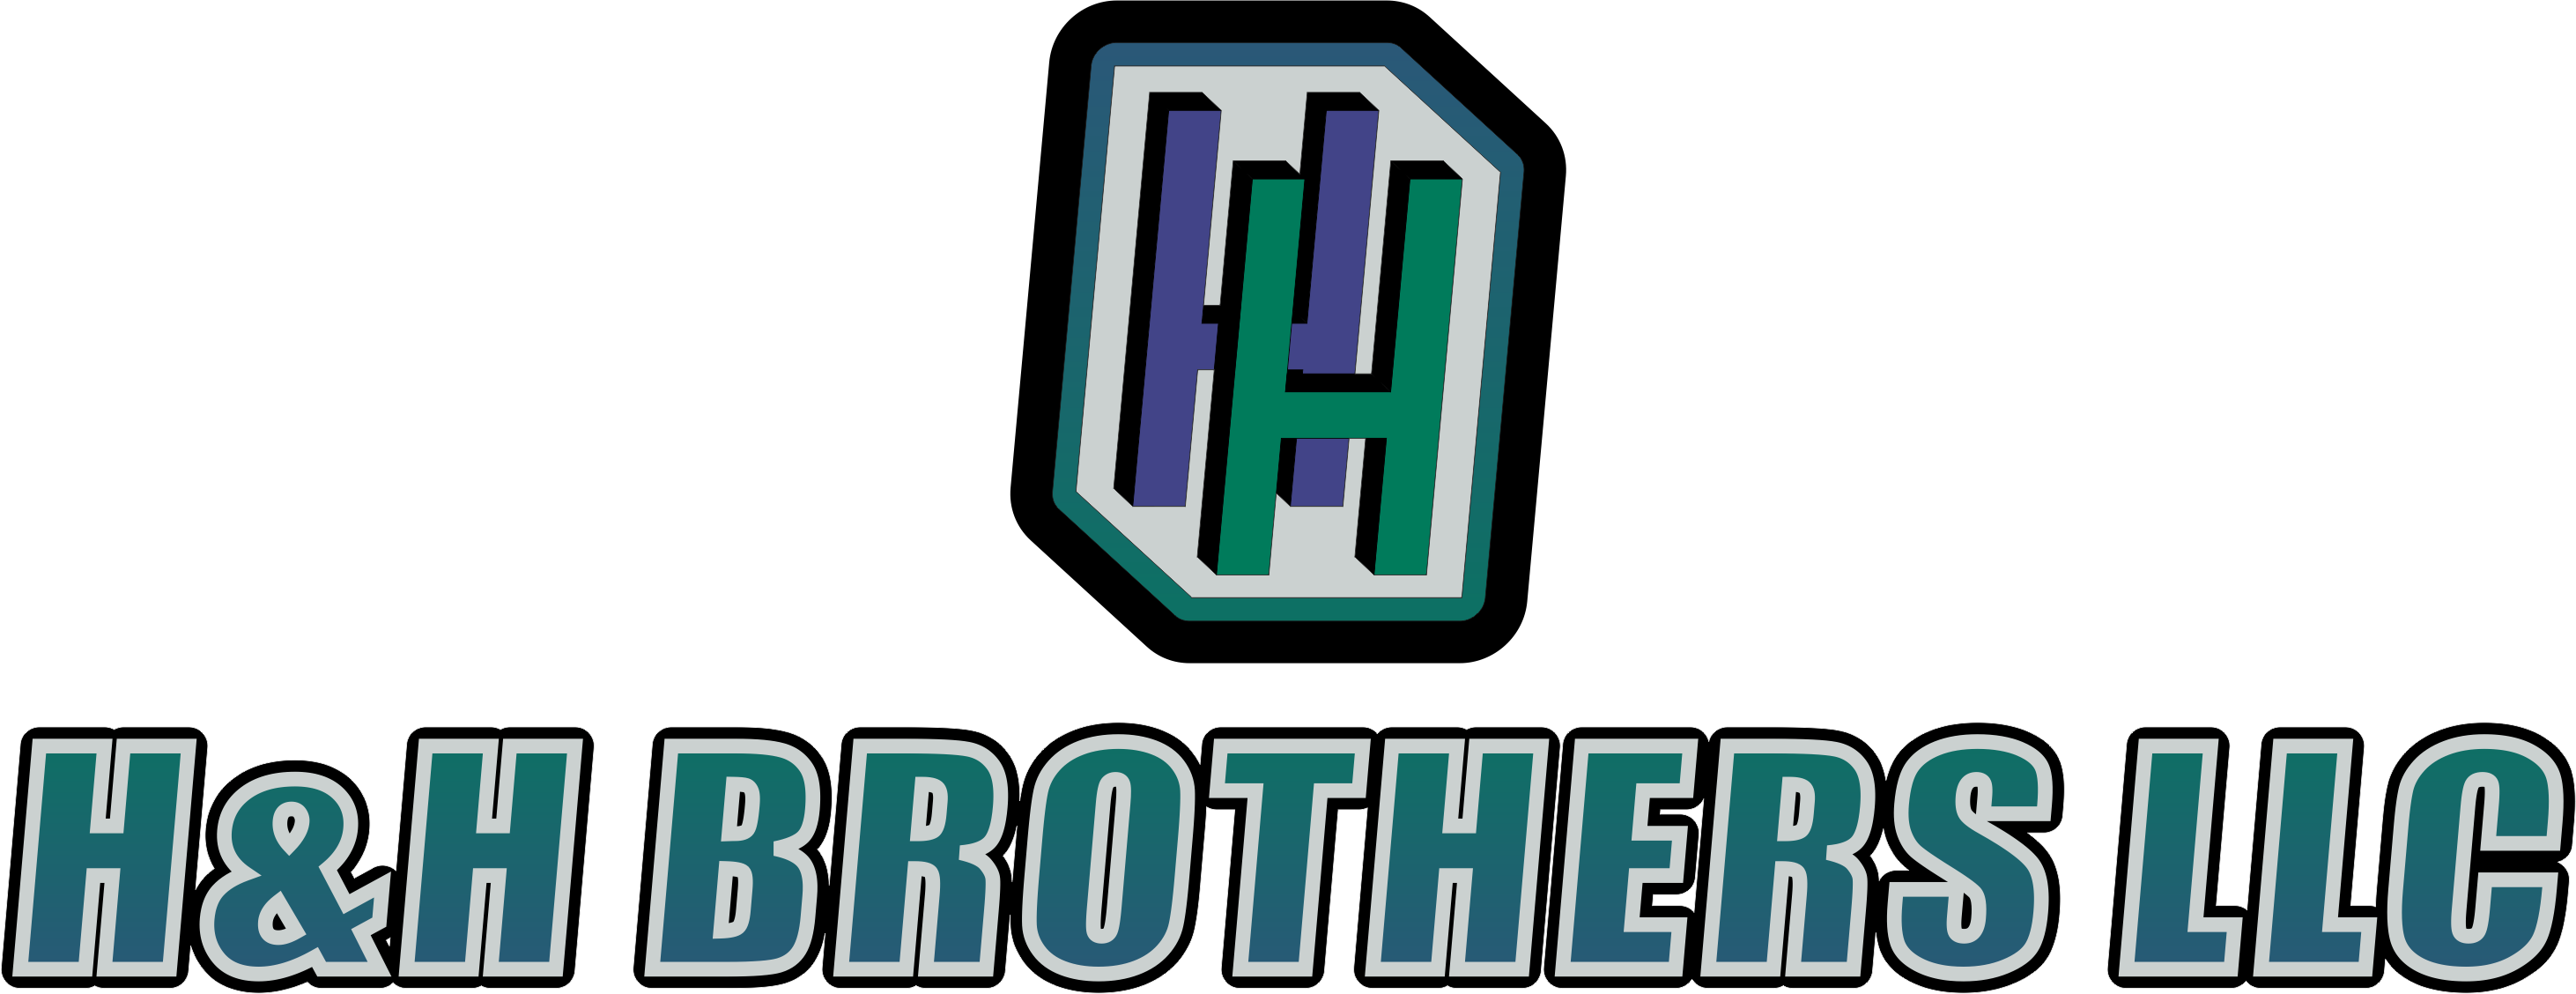 H&H Brothers